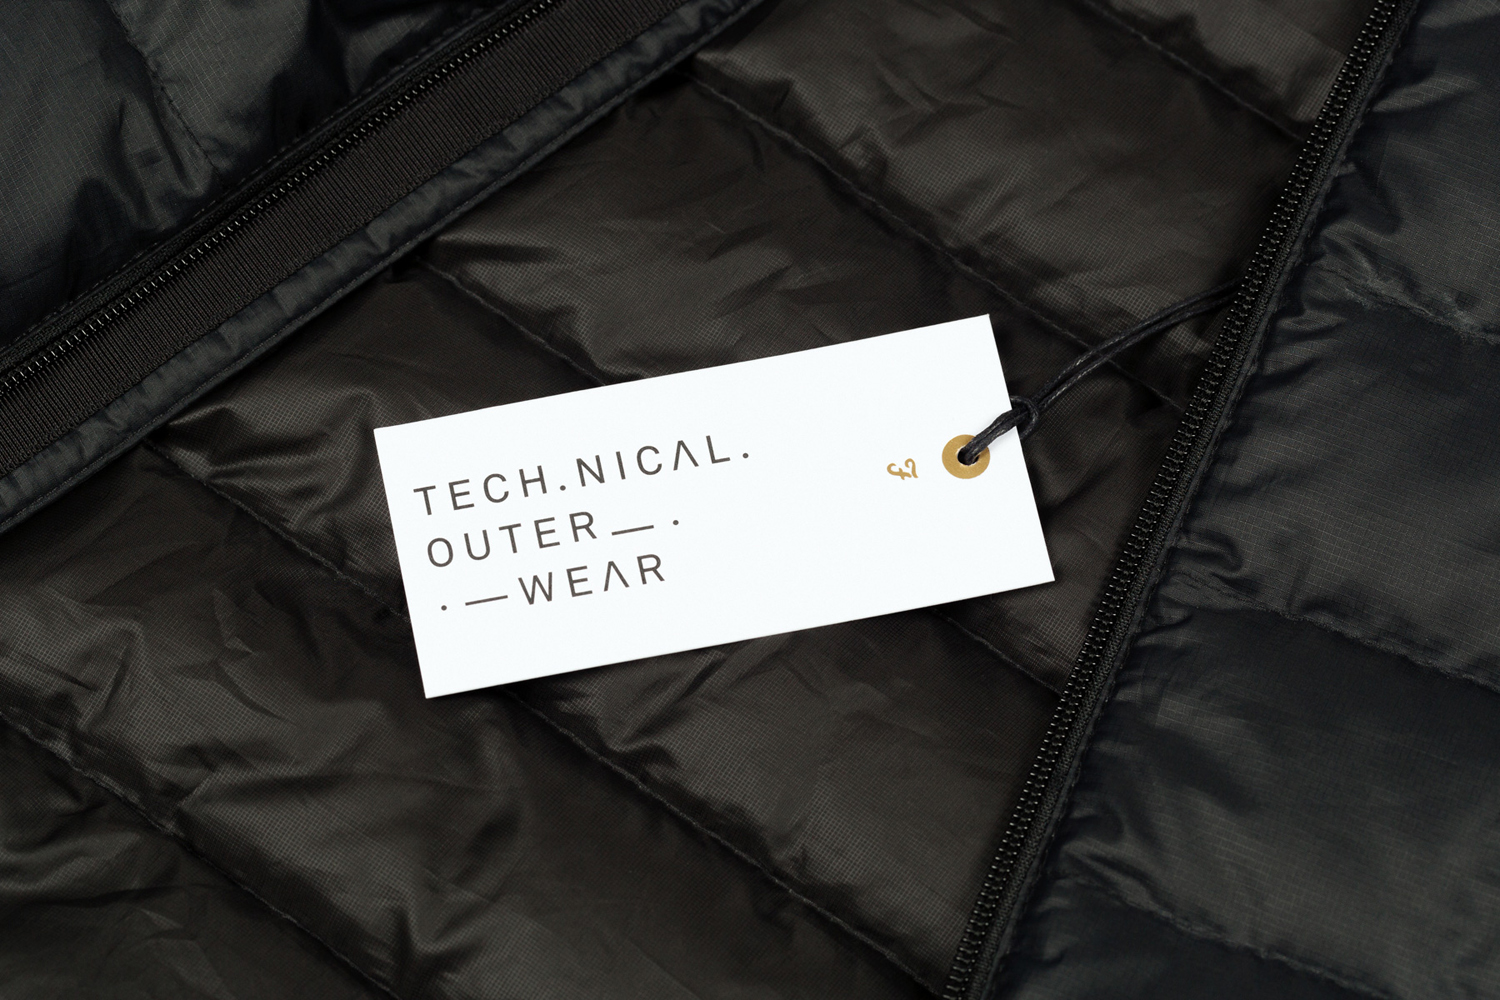 Brand identity and clothing tag with gold ink detail for British fashion brand Farah by graphic design studio Post